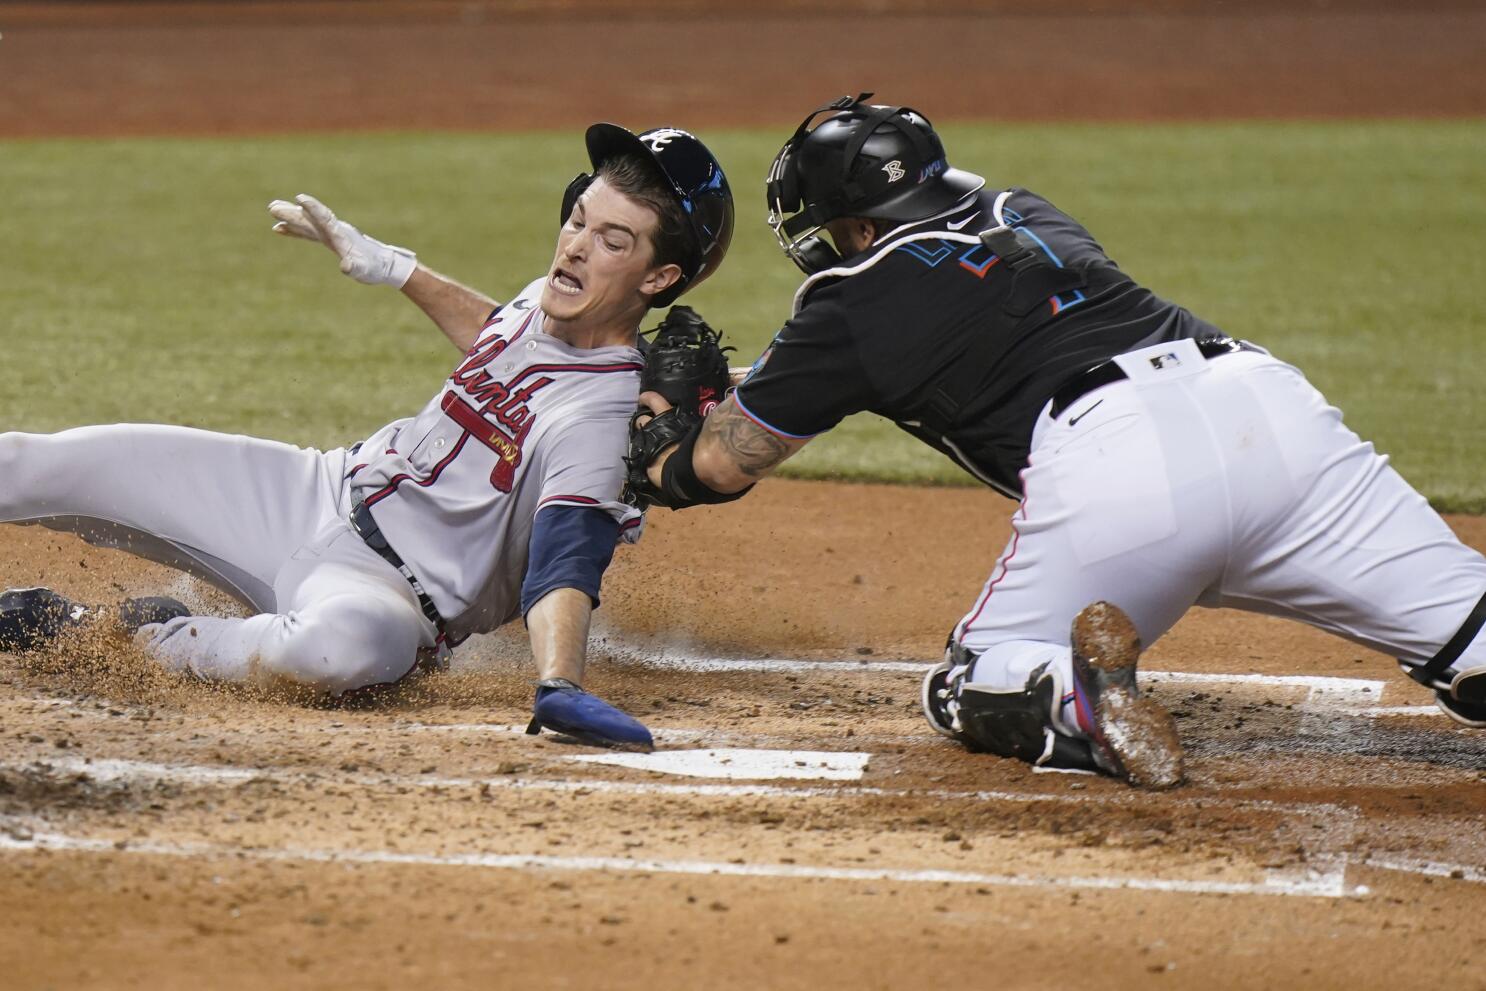 Cristian Javier falters in seventh inning as Braves take 3-1 lead